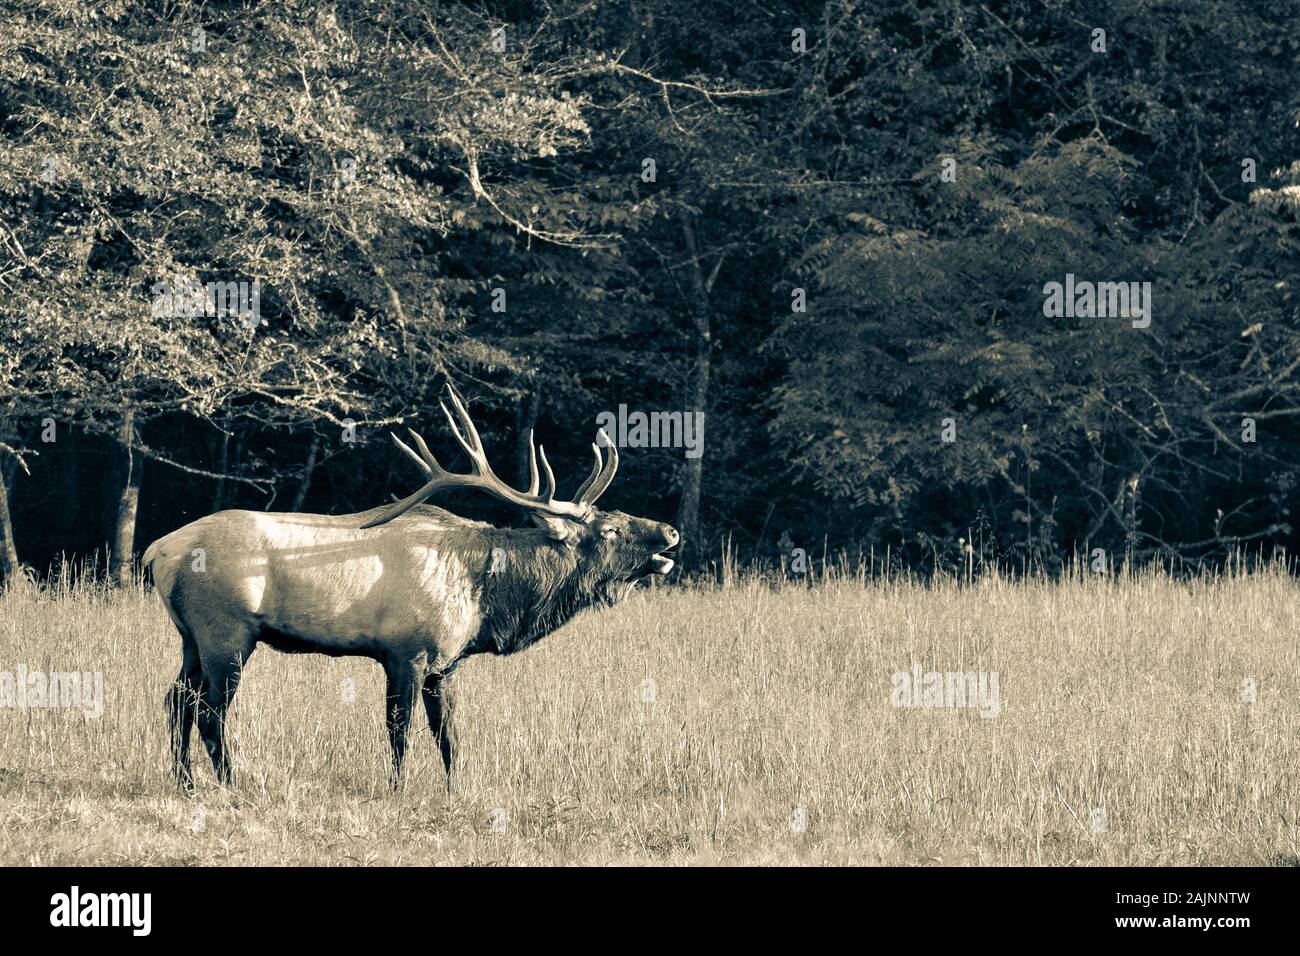 Wild bull elk with huge antlers bugling during rutting season at Cataloochee in the Smoky Mountains of North Carolina Stock Photo